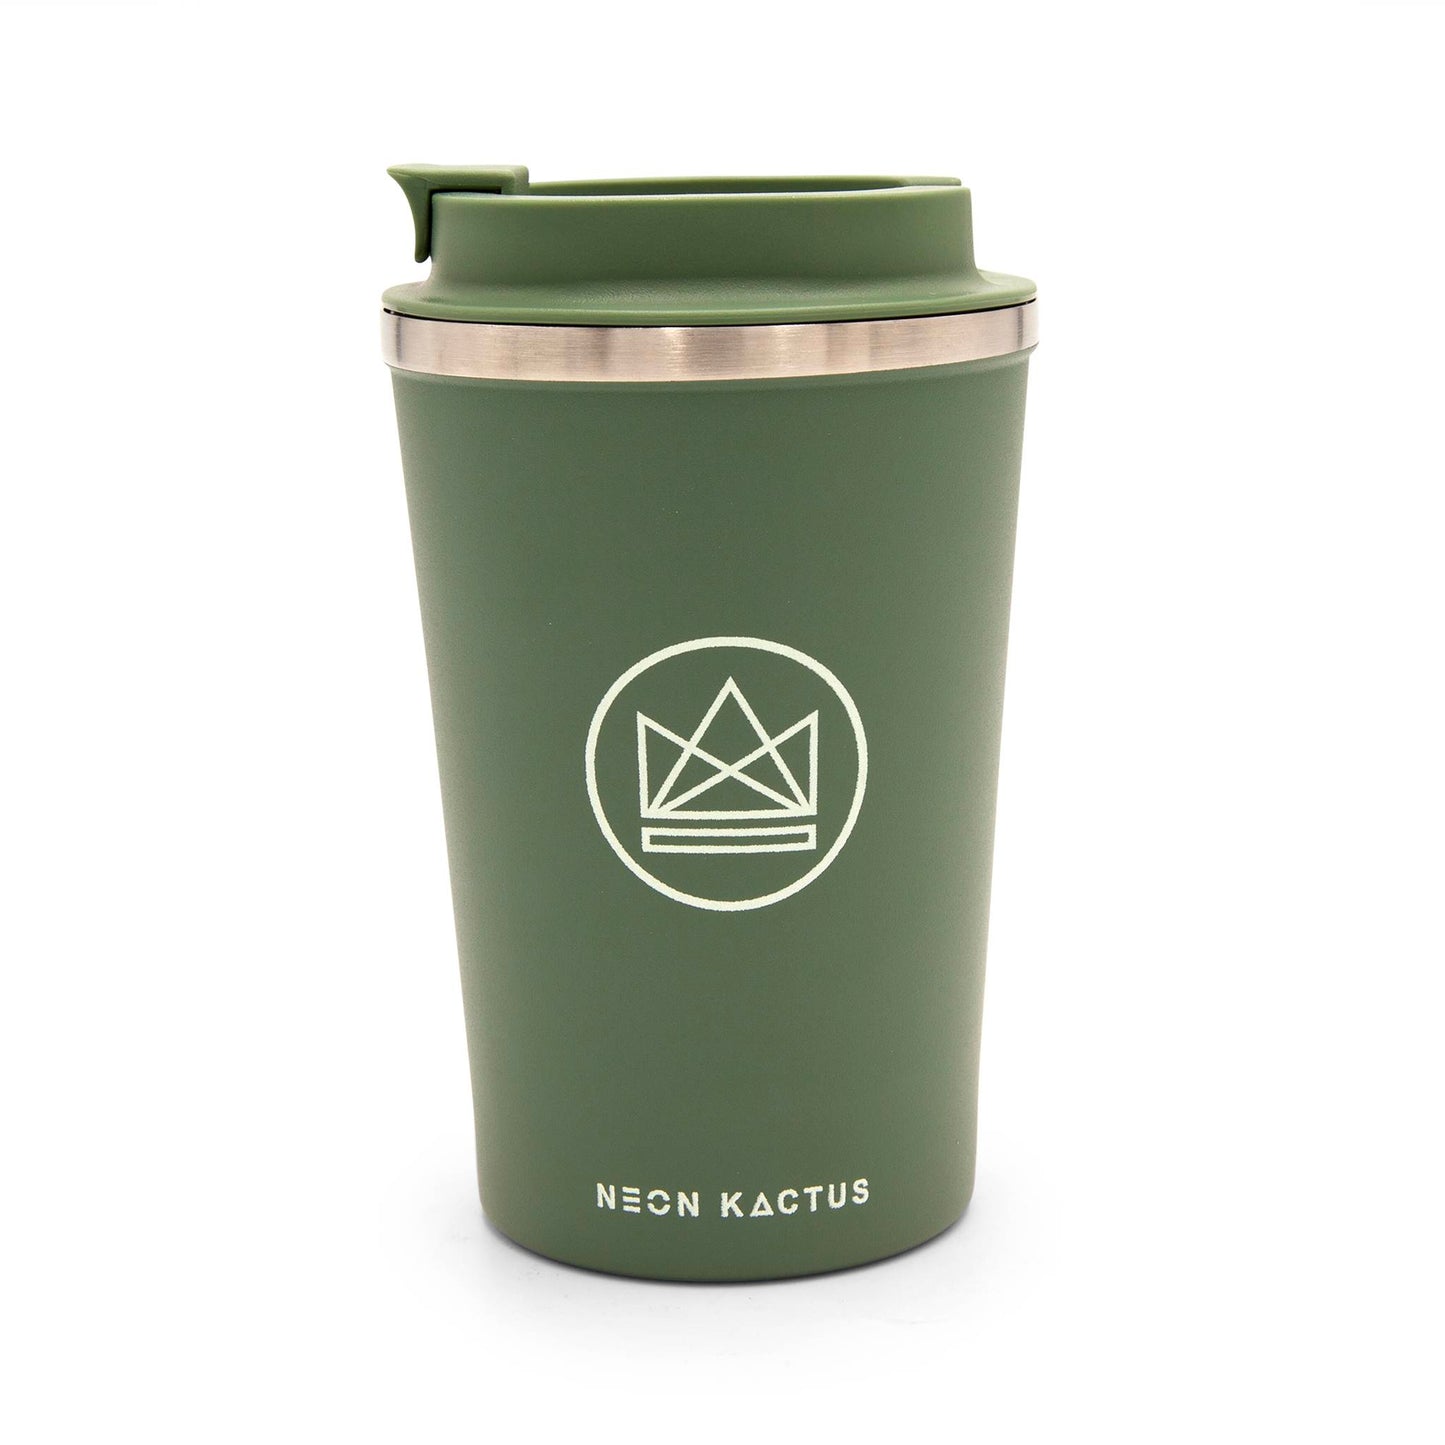 Neon Kactus Coffee Cup Stainless Steel Insulated Coffee Cup - 12oz - Happy Camper Green